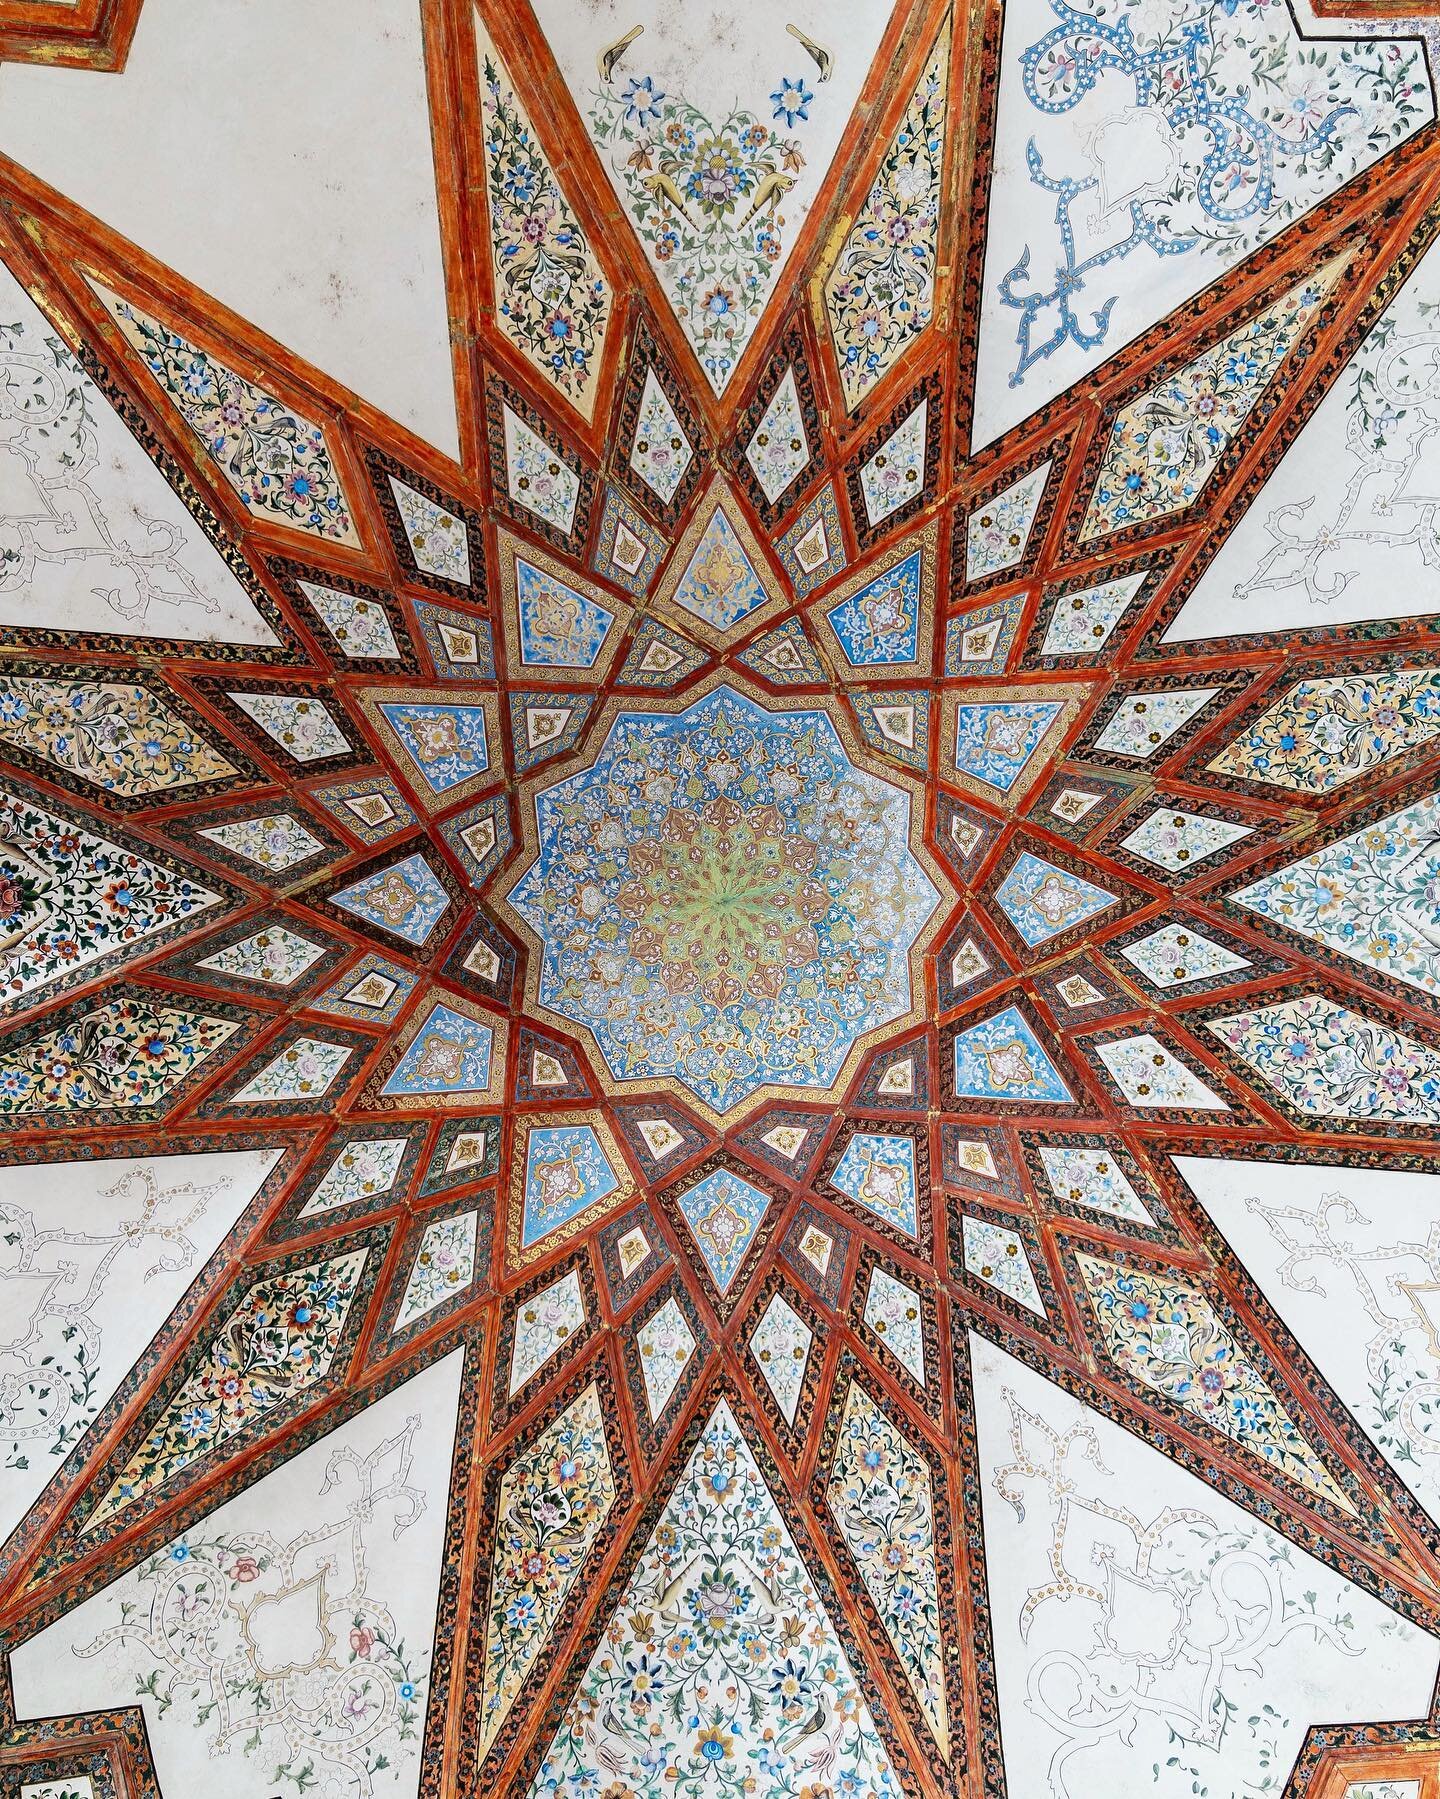 Ceiling details from one of the pavilions in Fin Gardens, Iran. I sadly had to leave this one out of the physical exhibition of &lsquo;The Silk Road: A Living History&rsquo; but it does appear in the online exhibition which I&rsquo;ll call the &lsquo